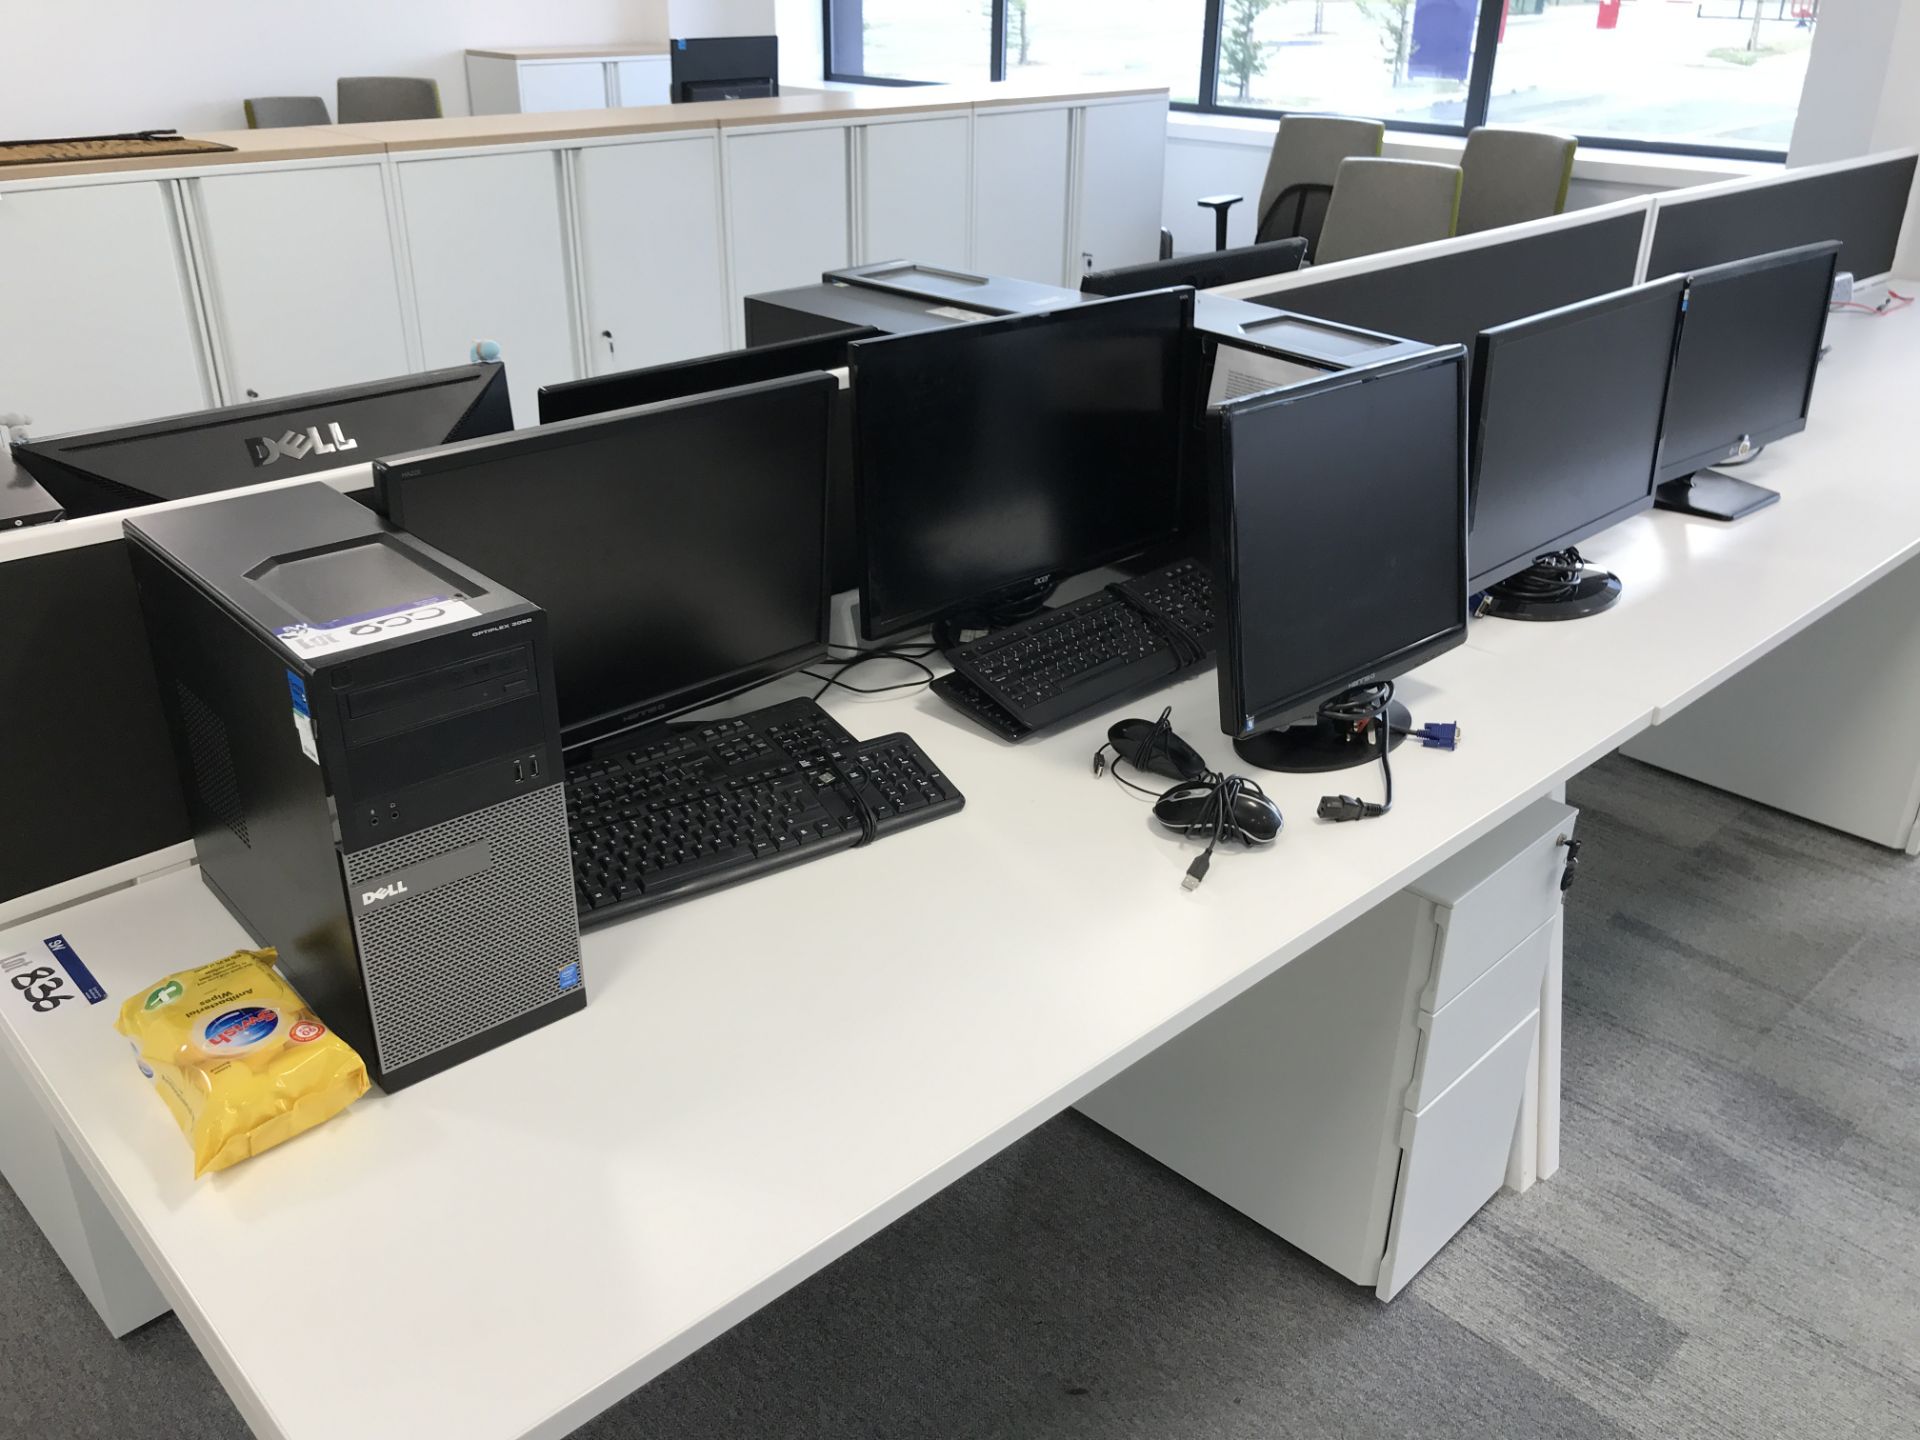 3 x Dell Personal Computers, with 6 x Monitors, 5